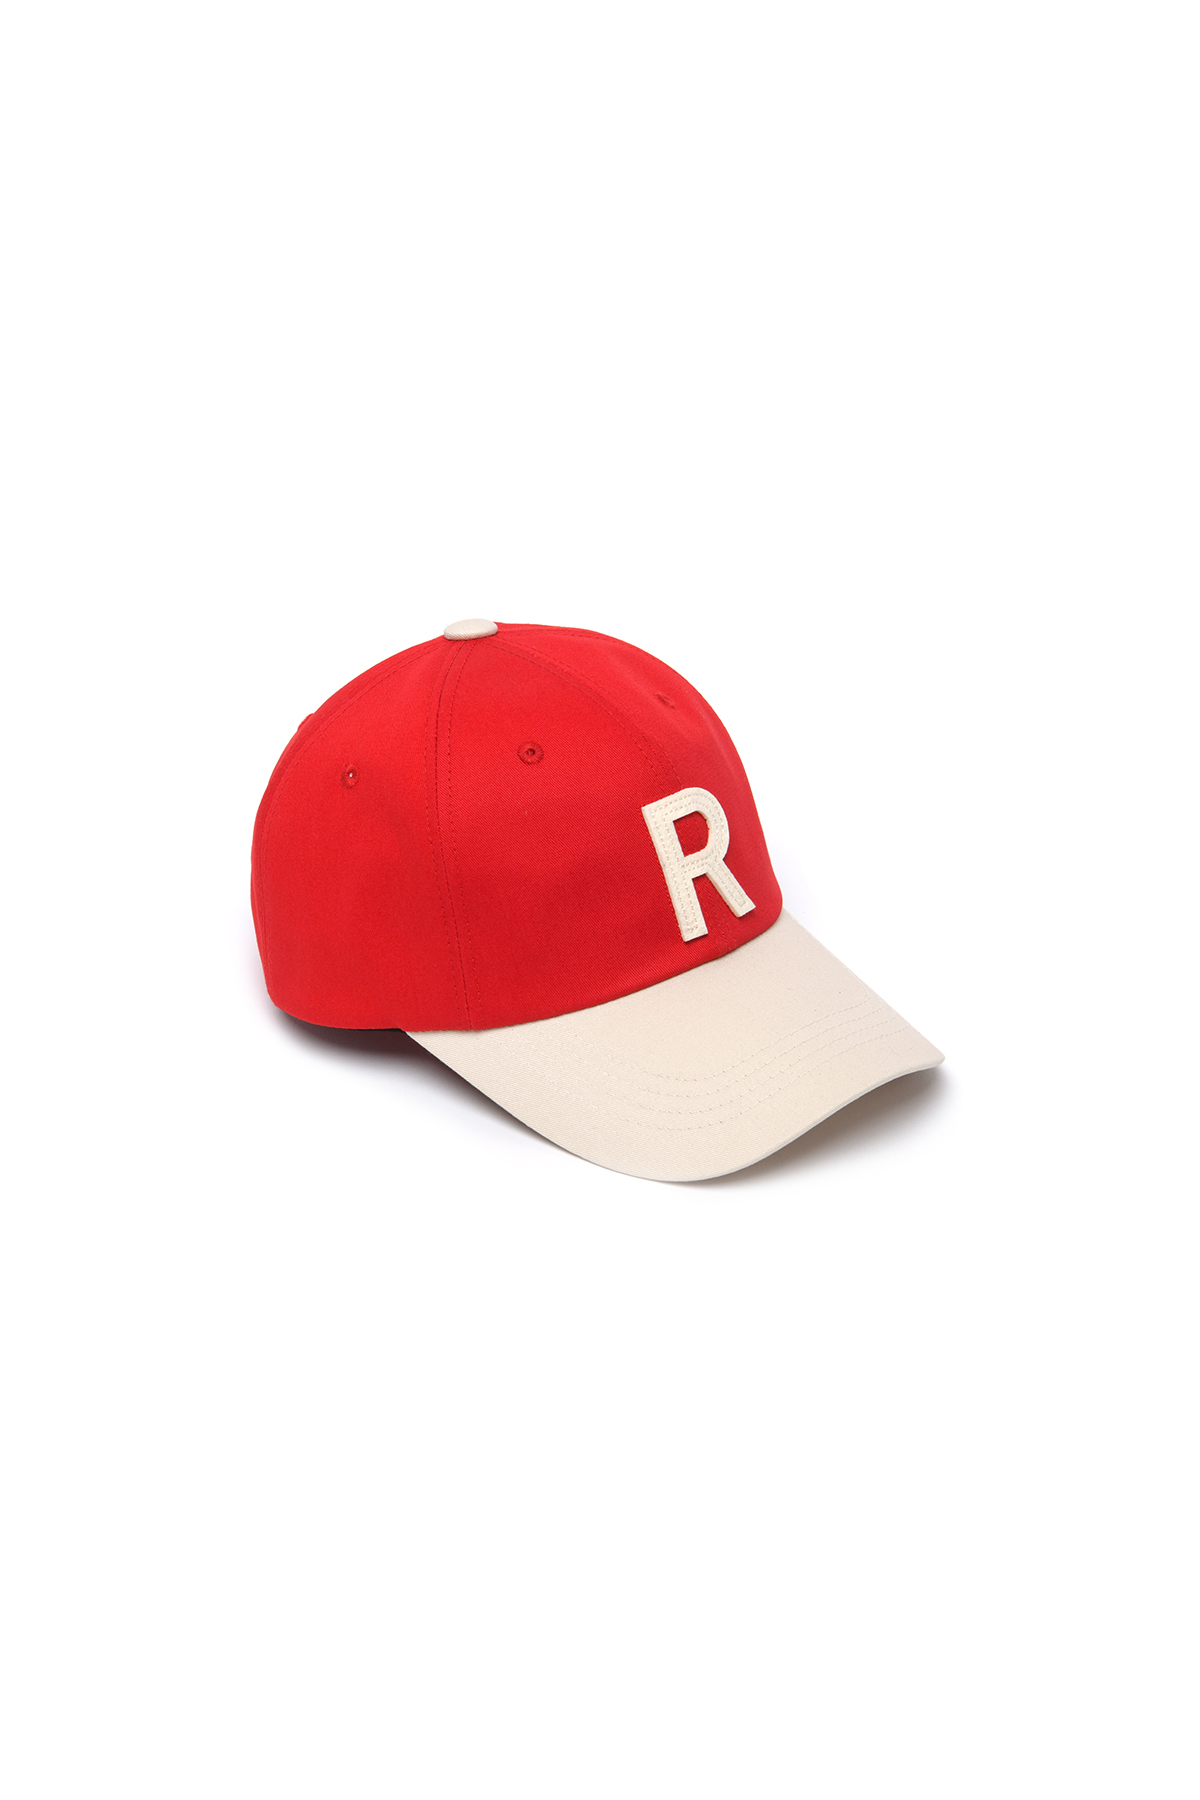 R PATCH BALL CAP IVORY/RED